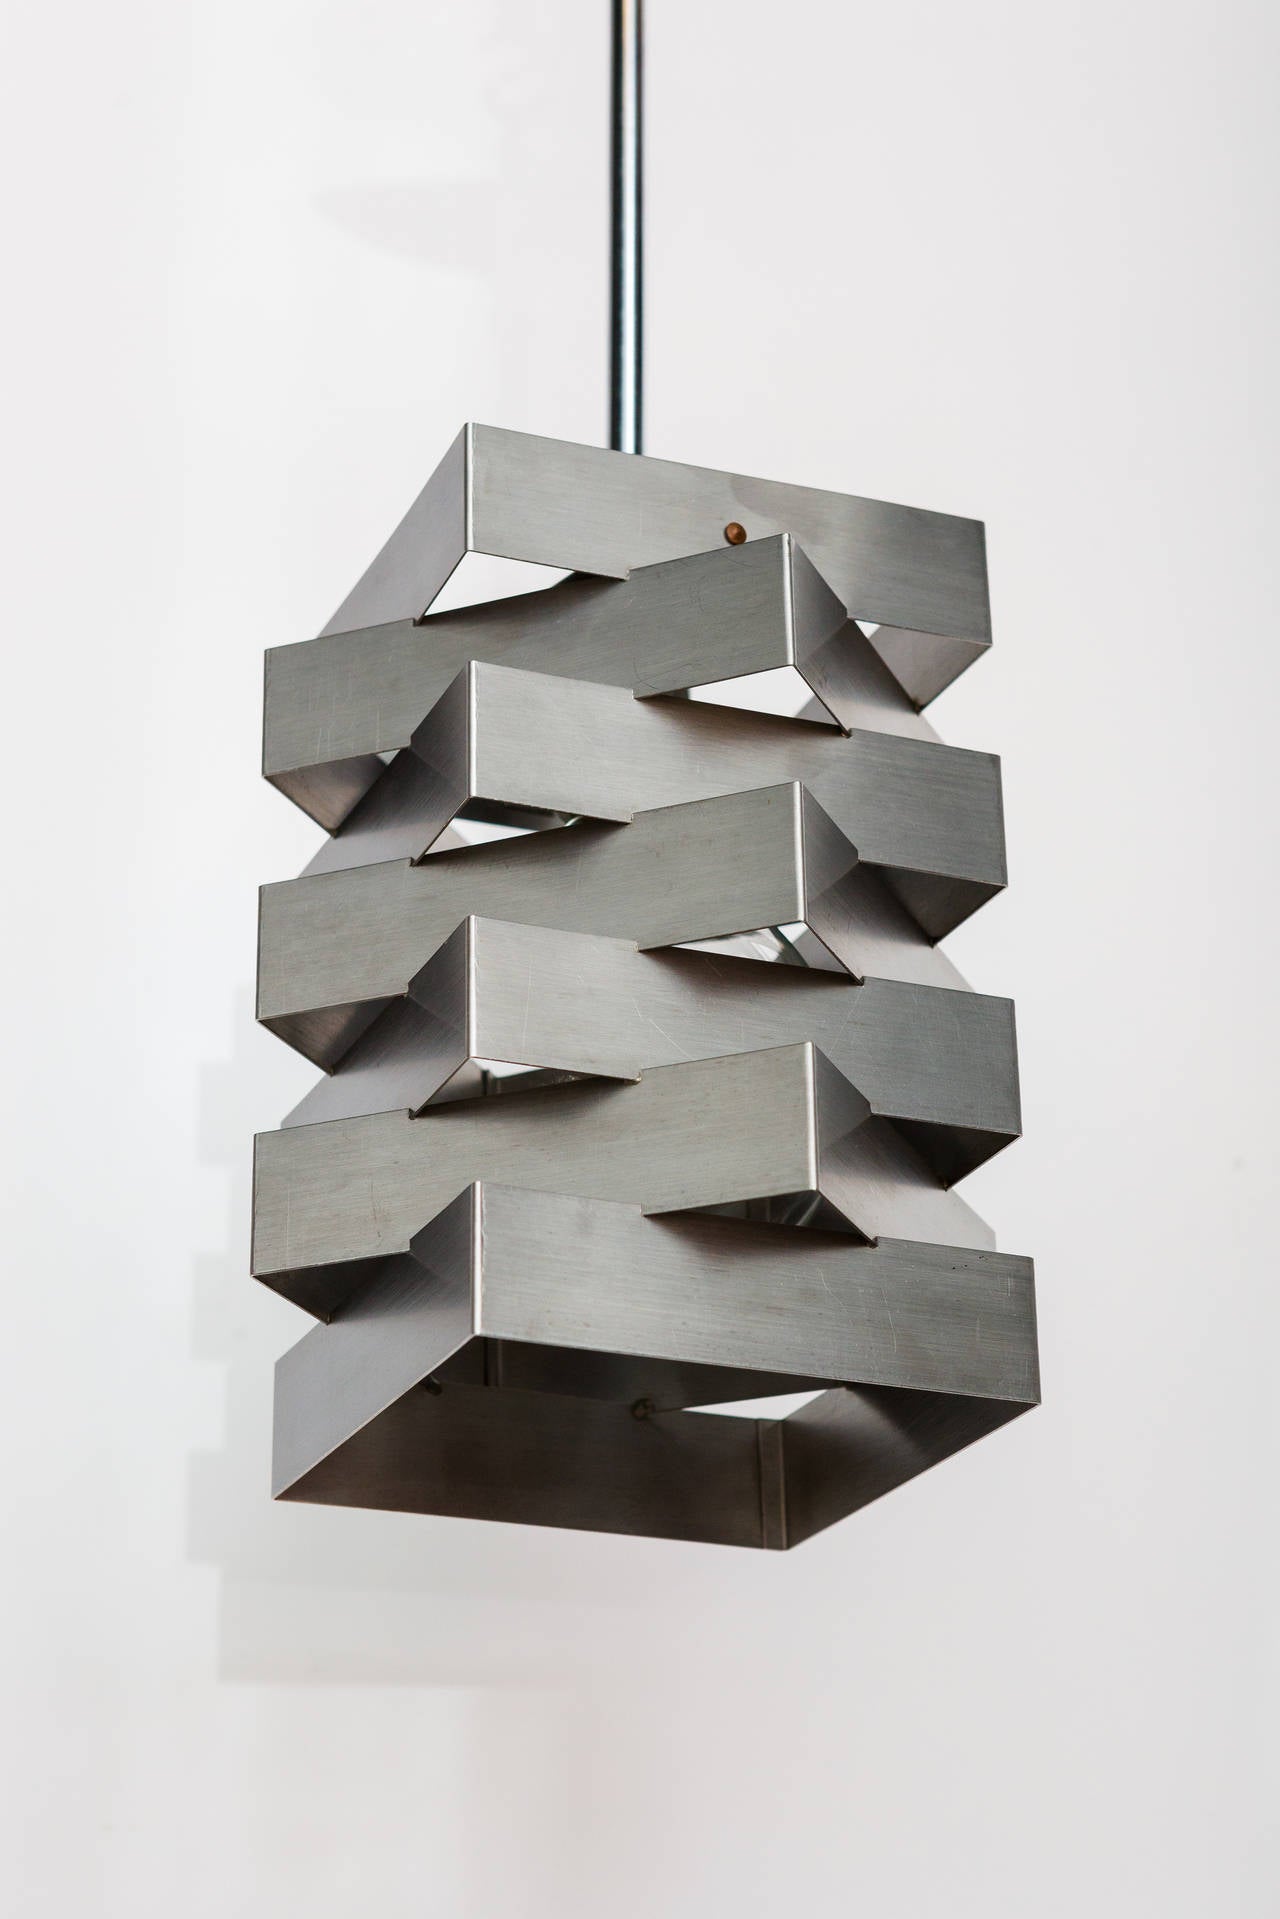 A geometric pendant comprised of stacked and intersecting squares of steel. As shown they measure 23.5